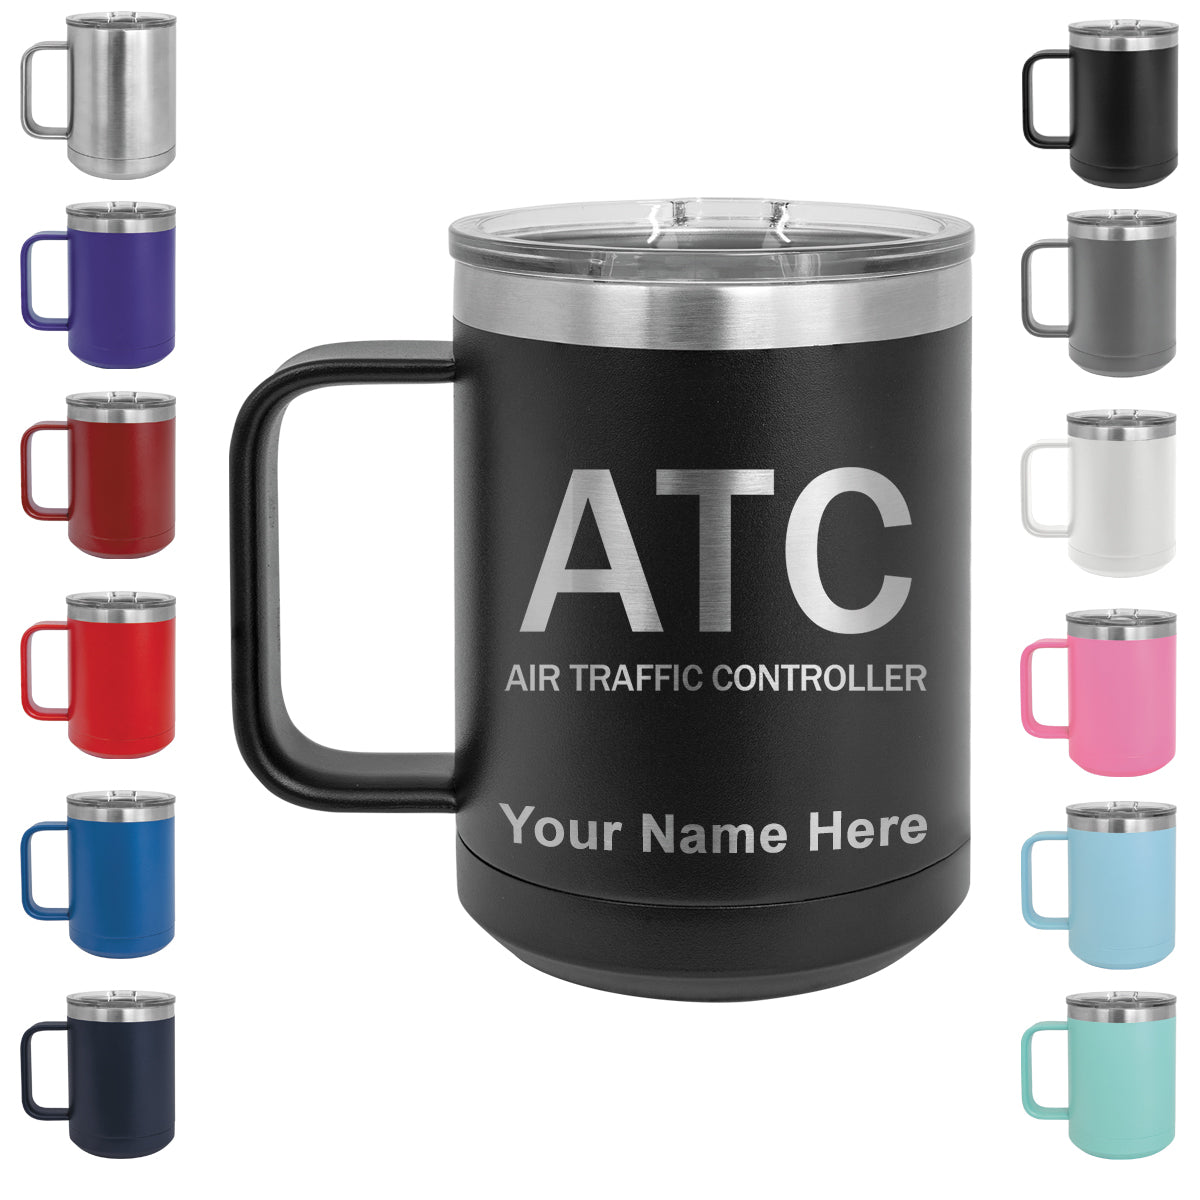 15oz Vacuum Insulated Coffee Mug, ATC Air Traffic Controller, Personalized Engraving Included